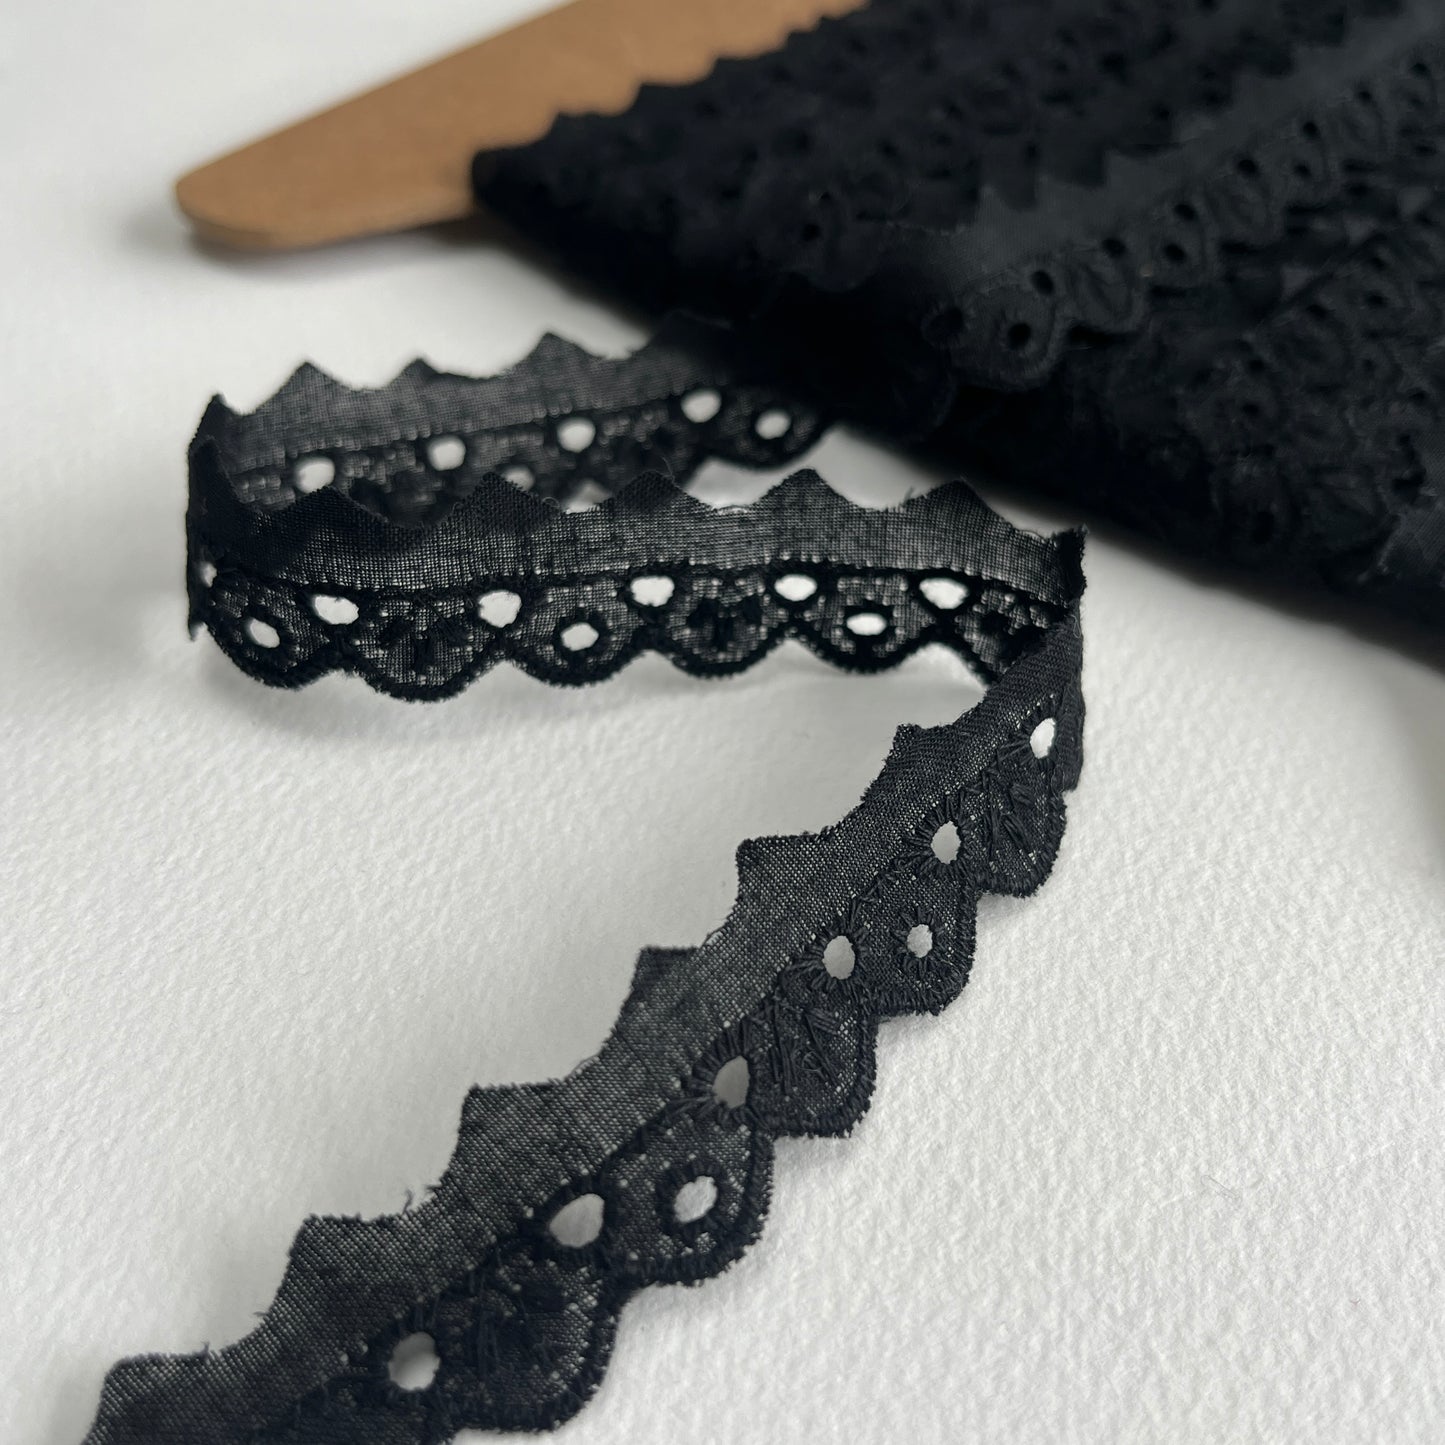 Narrow Broderie Anglaise cotton trim with scalloped edge in black. 1cm overall width / 1cm embroidered width , KLEINS HABERDASHERY. Choose our range of vintage lace, trims & sewing accoutrement rescued from a London haberdasher. Sew sustainably.